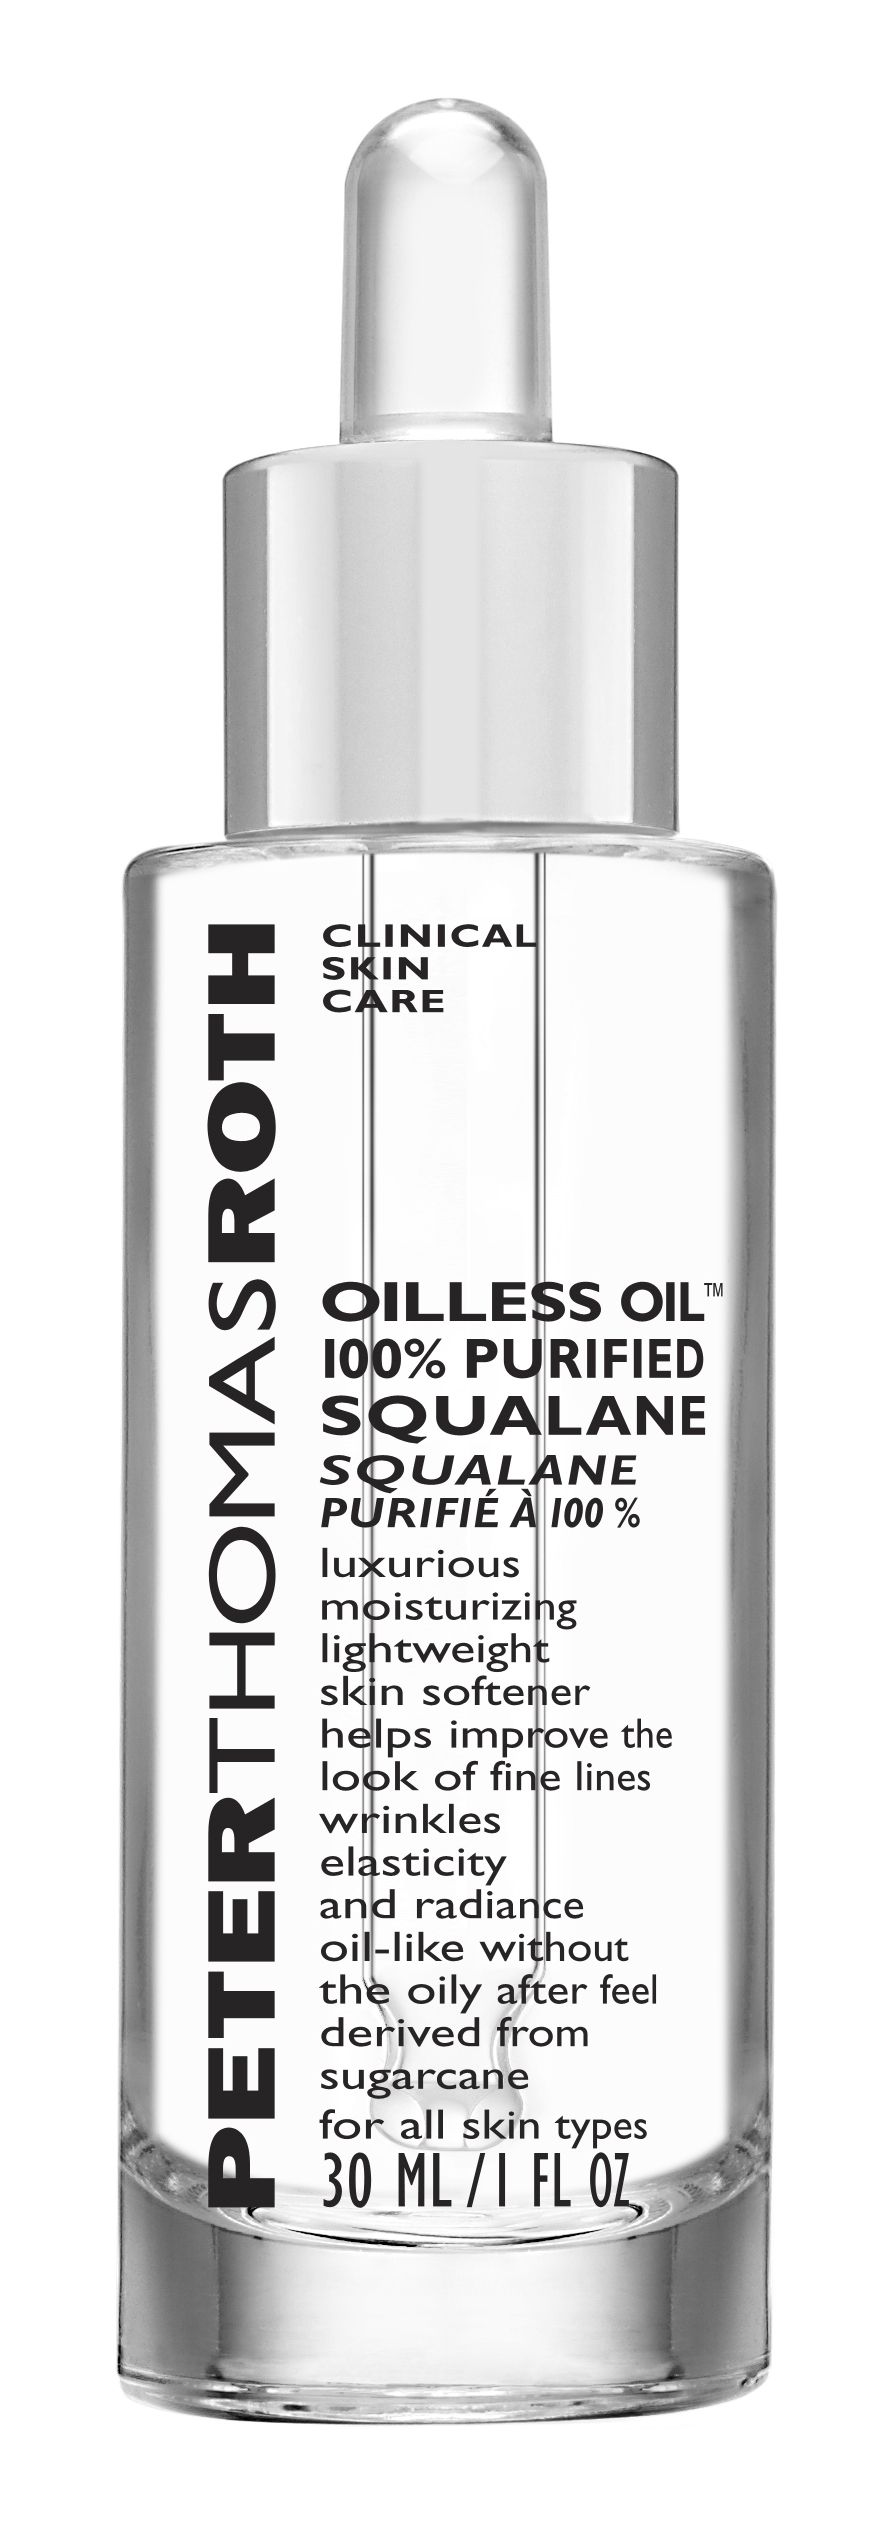 Se Peter Thomas Roth Oilless Oil 100% Purified Squalane 30 ml. hos Well.dk